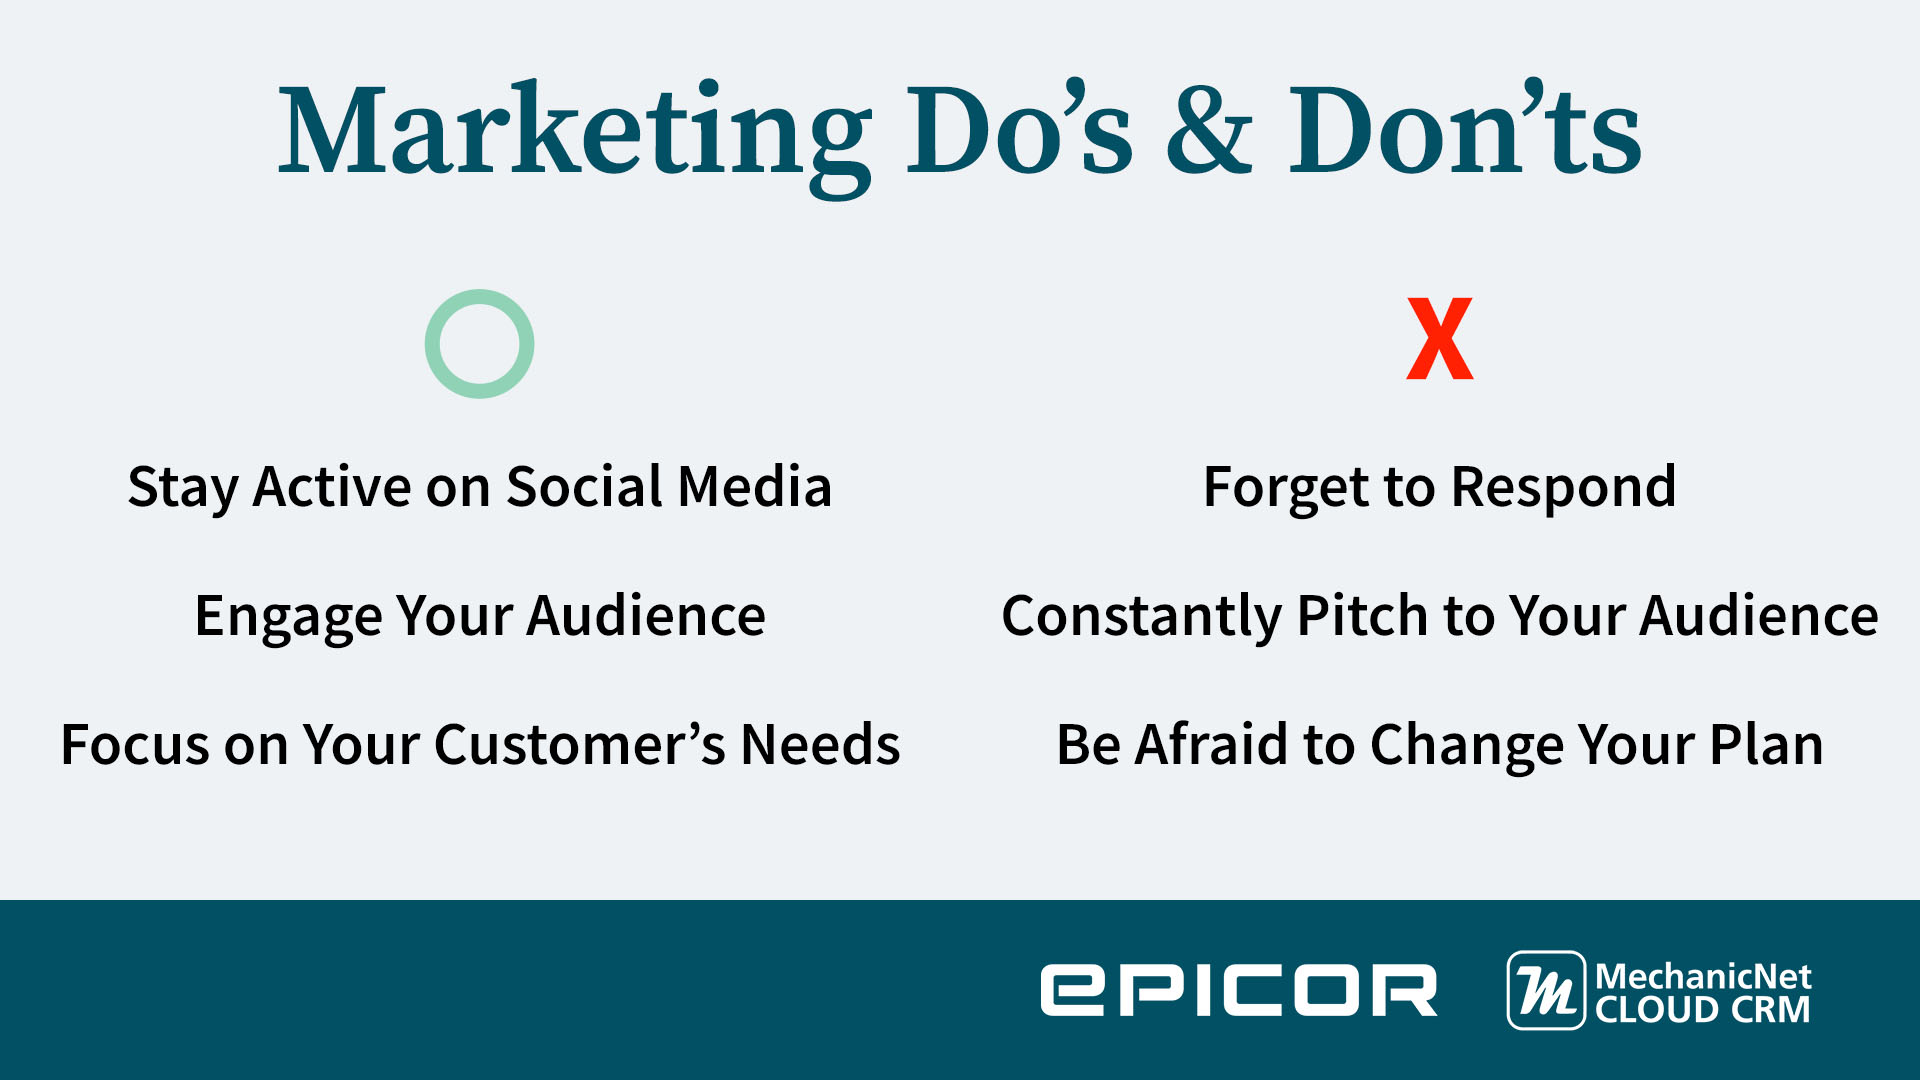 marketing do's and don'ts do: stay active on social media, engage your audience, focus on your customer's needs don't: forget to respond, constantly pitch to your audience, be afraid to change your plan